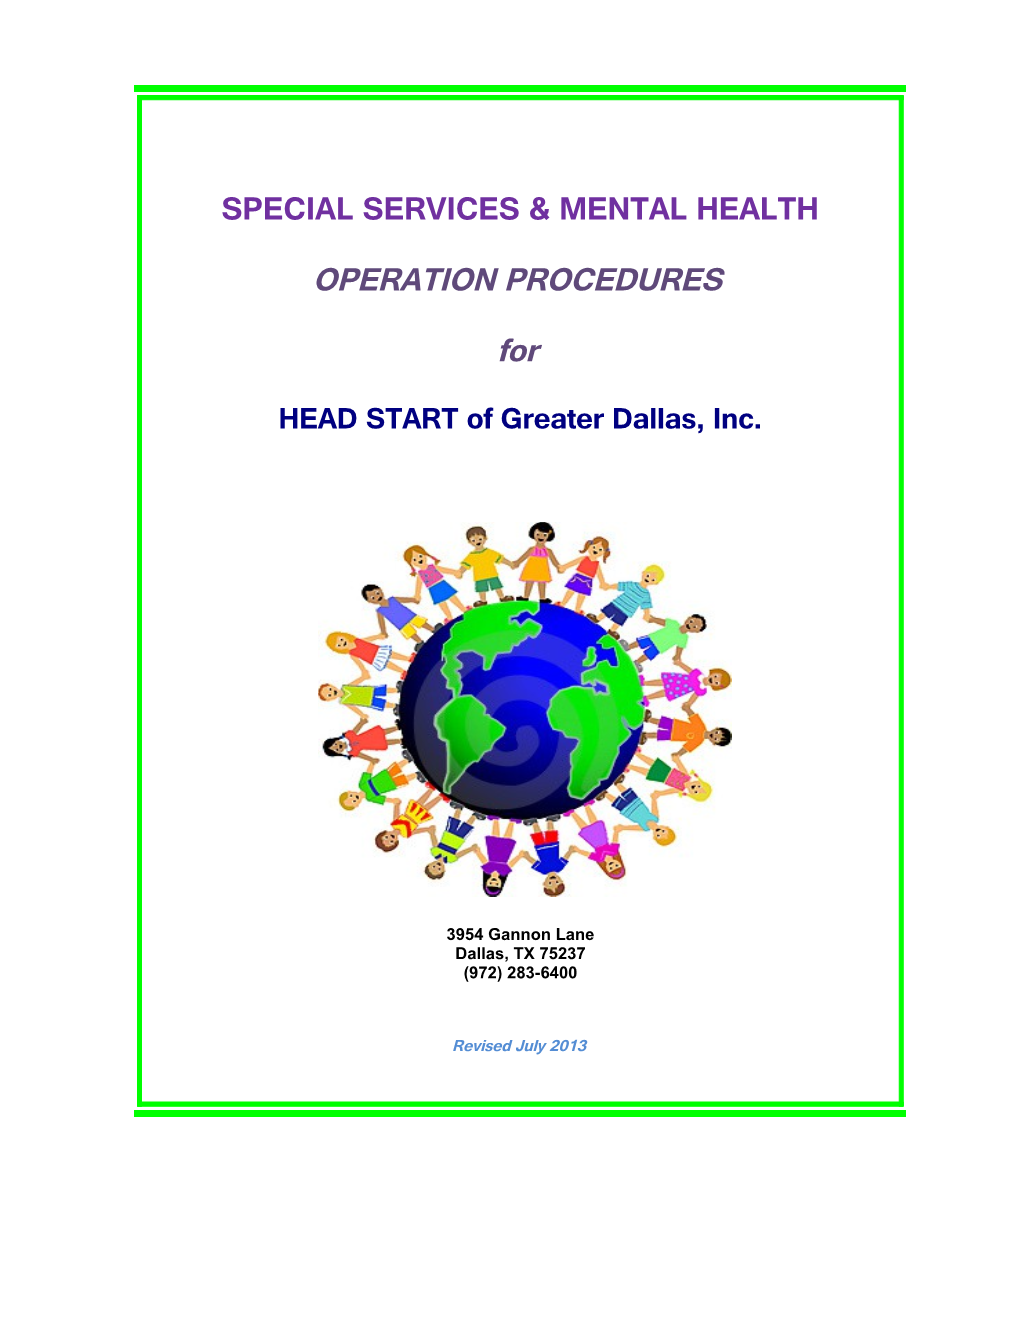 Special Services and Mental Health Operation Procedures